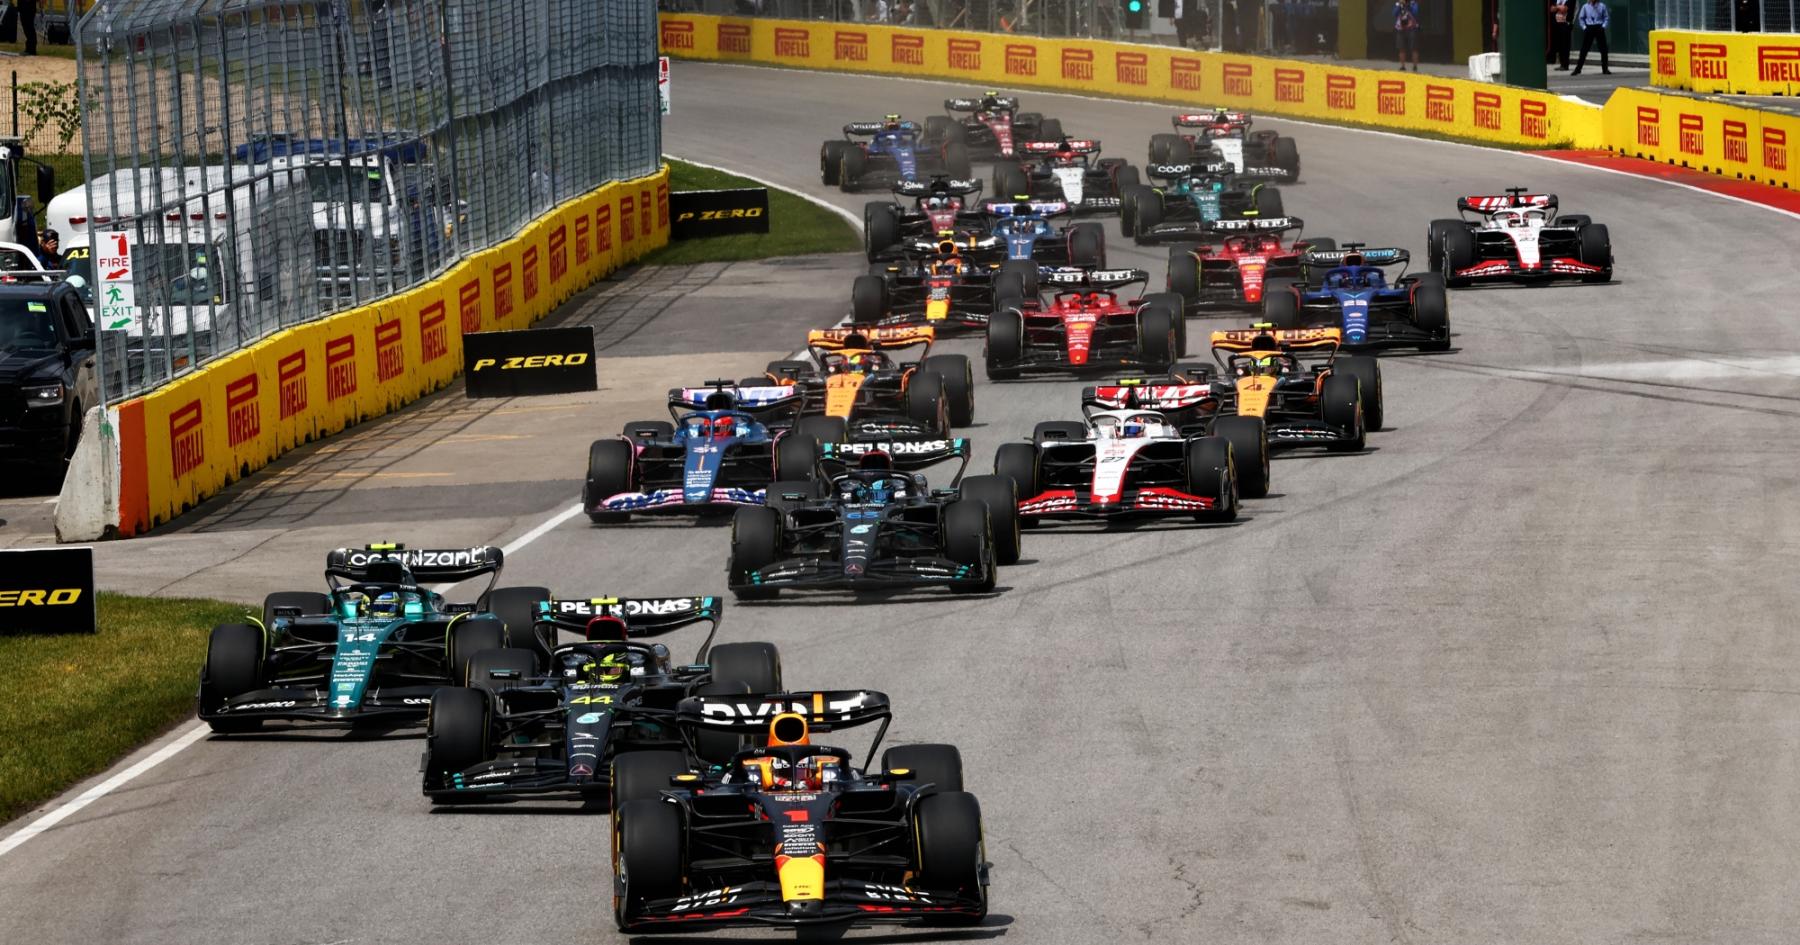 Poll: Will Red Bull continue to struggle at the Canadian GP?